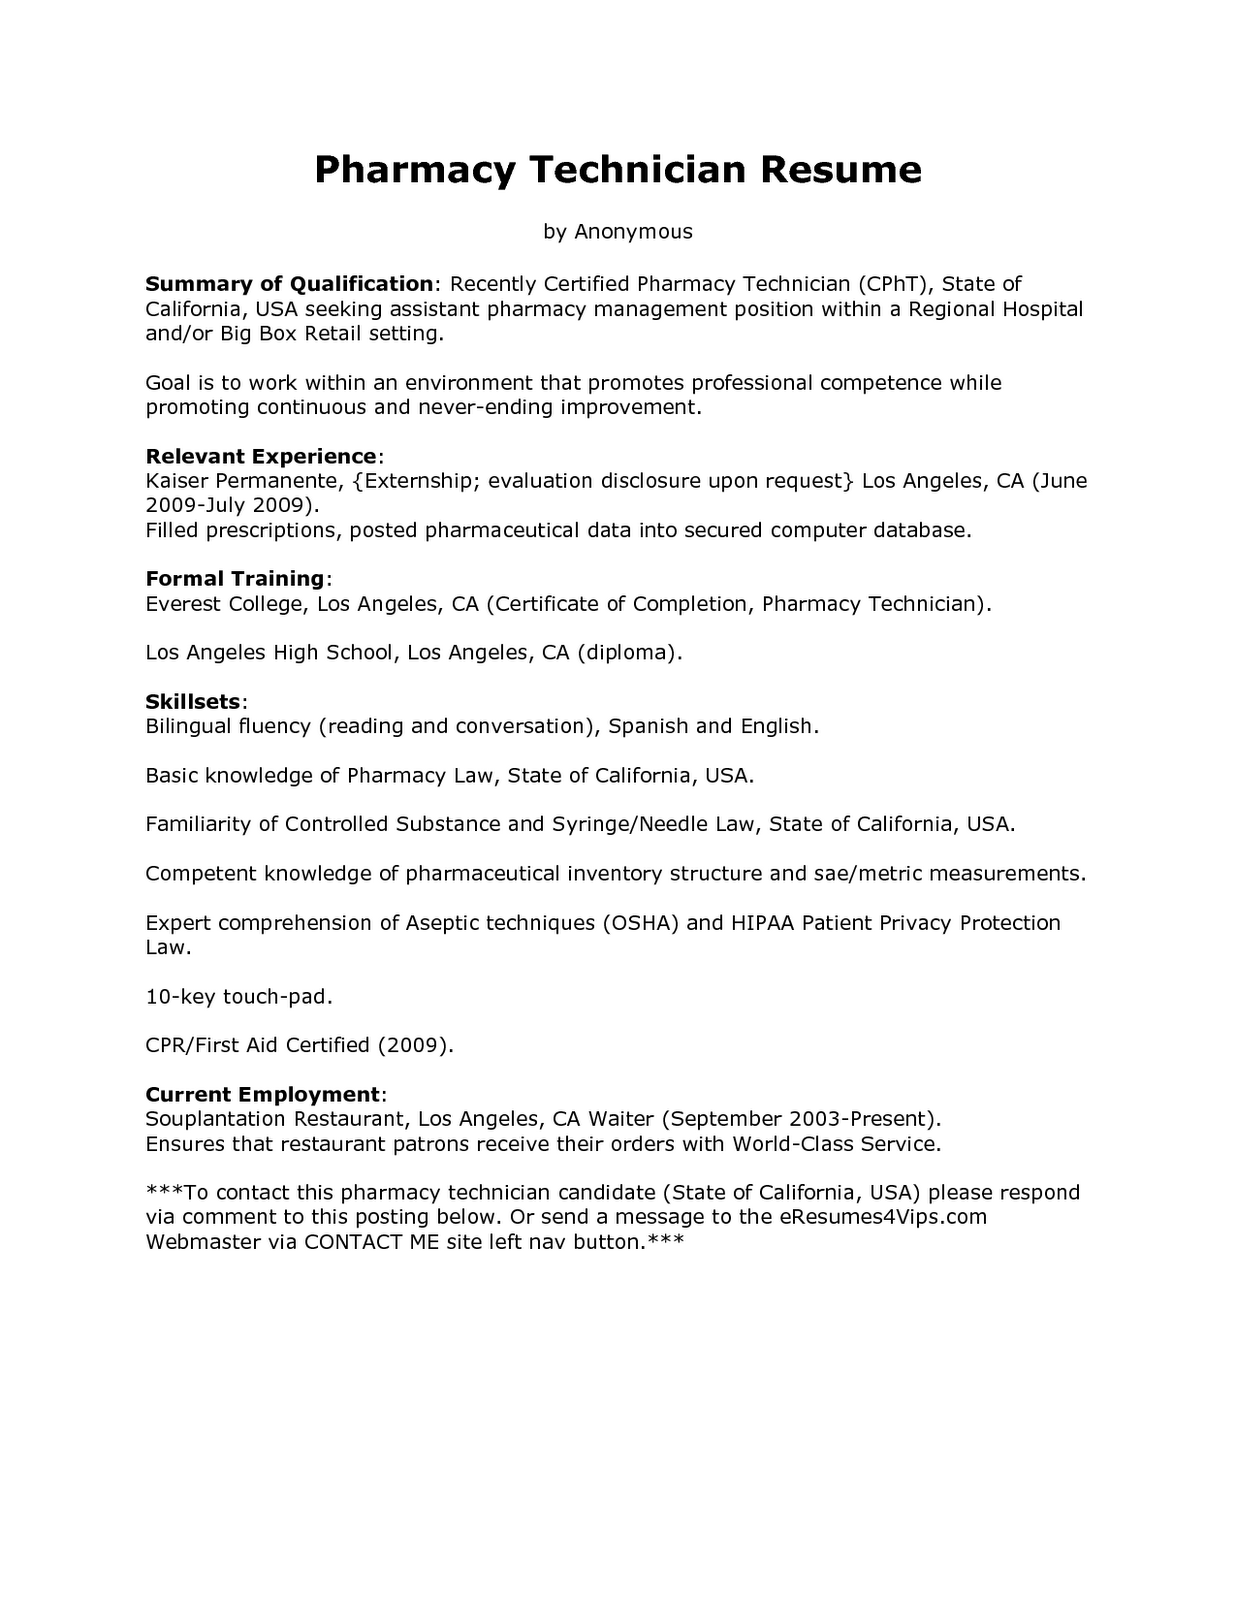 Aircraft cleaner resume